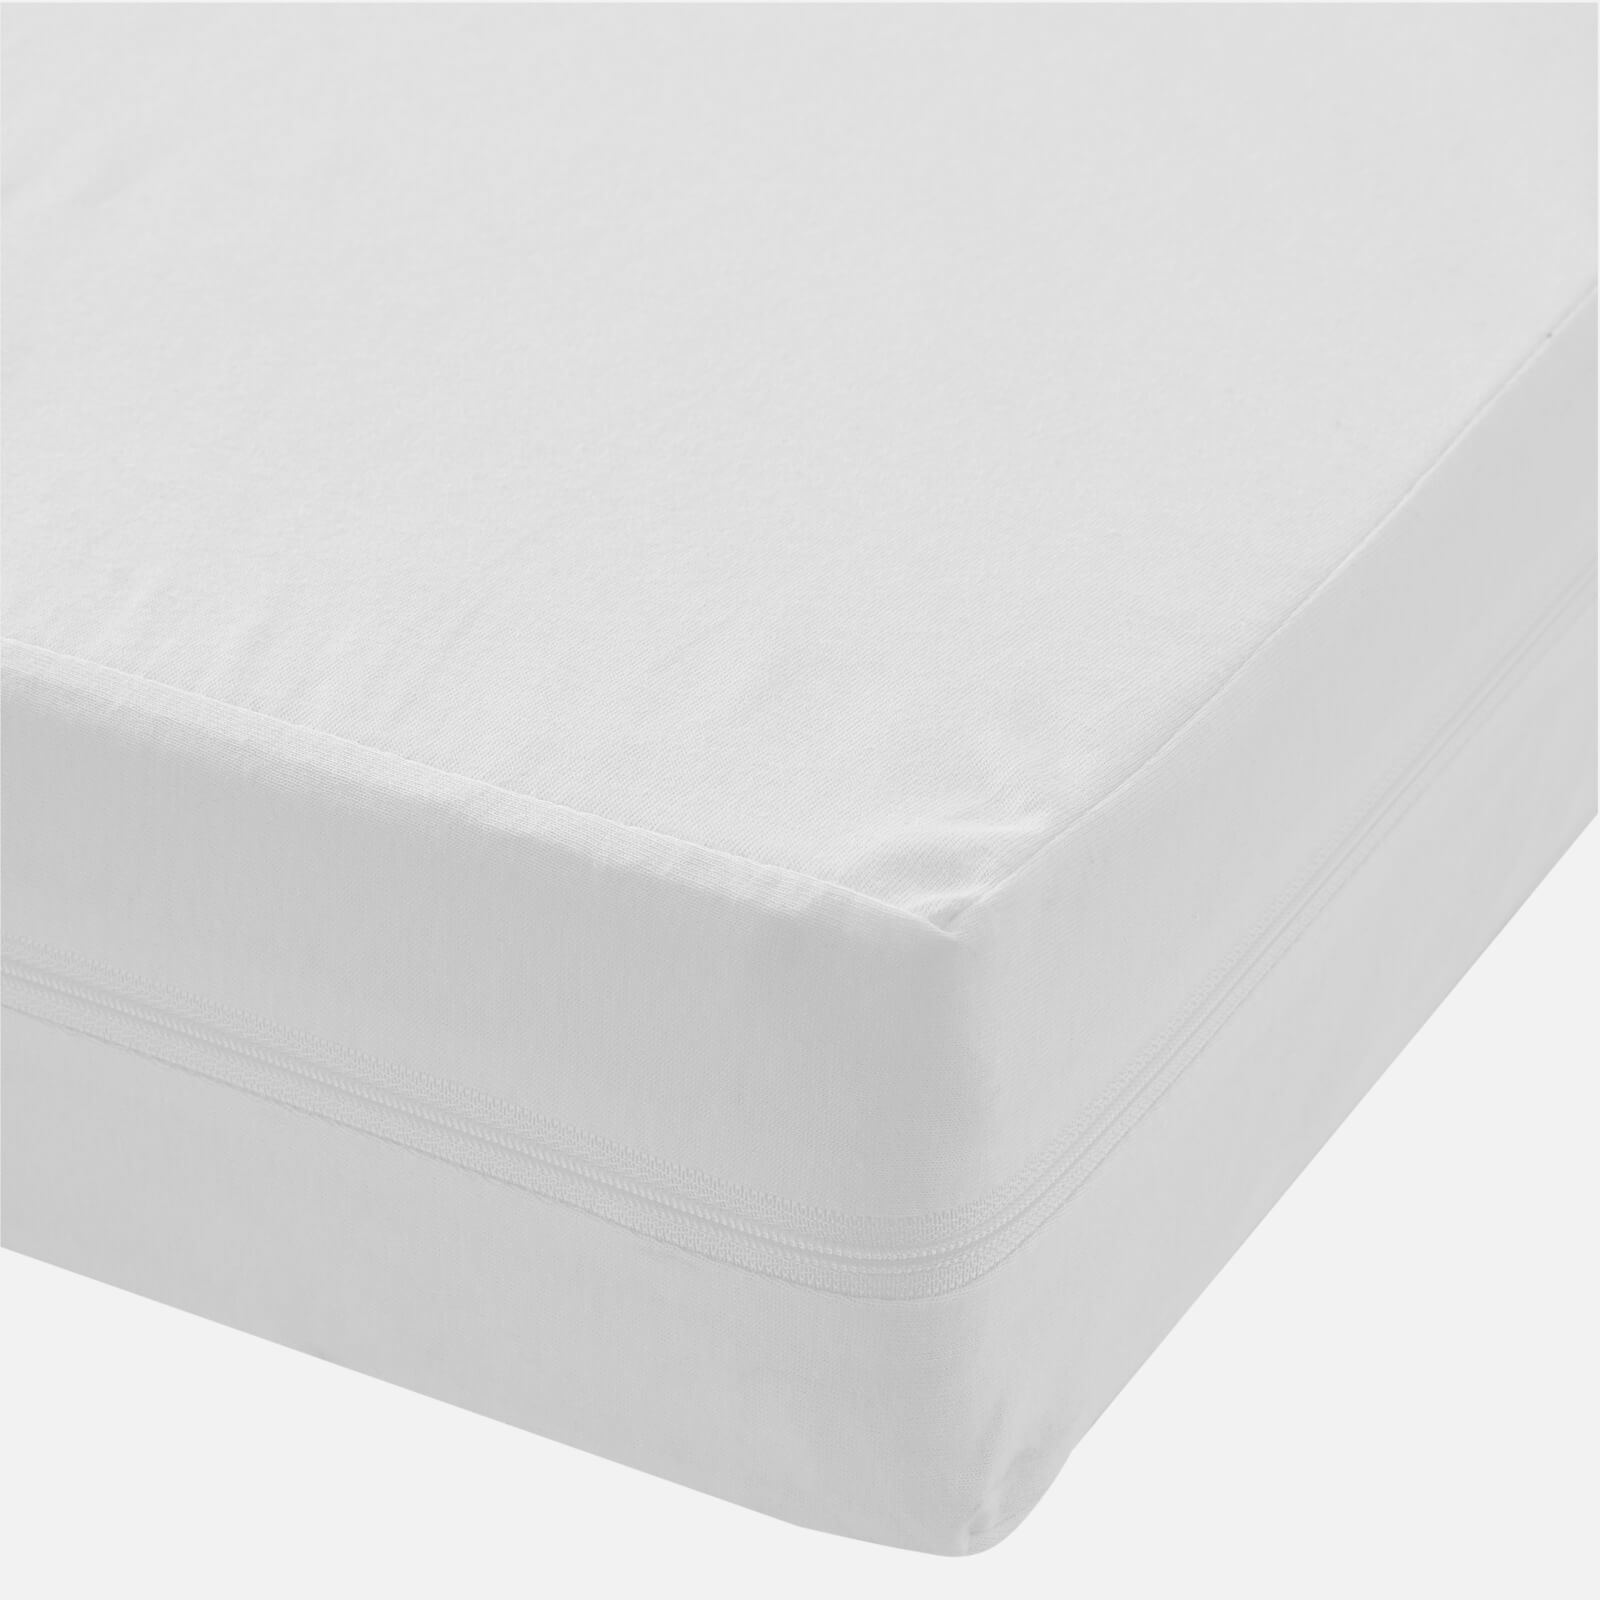 in homeware Baby Anti-Allergy Mattress Protector - White - Cot